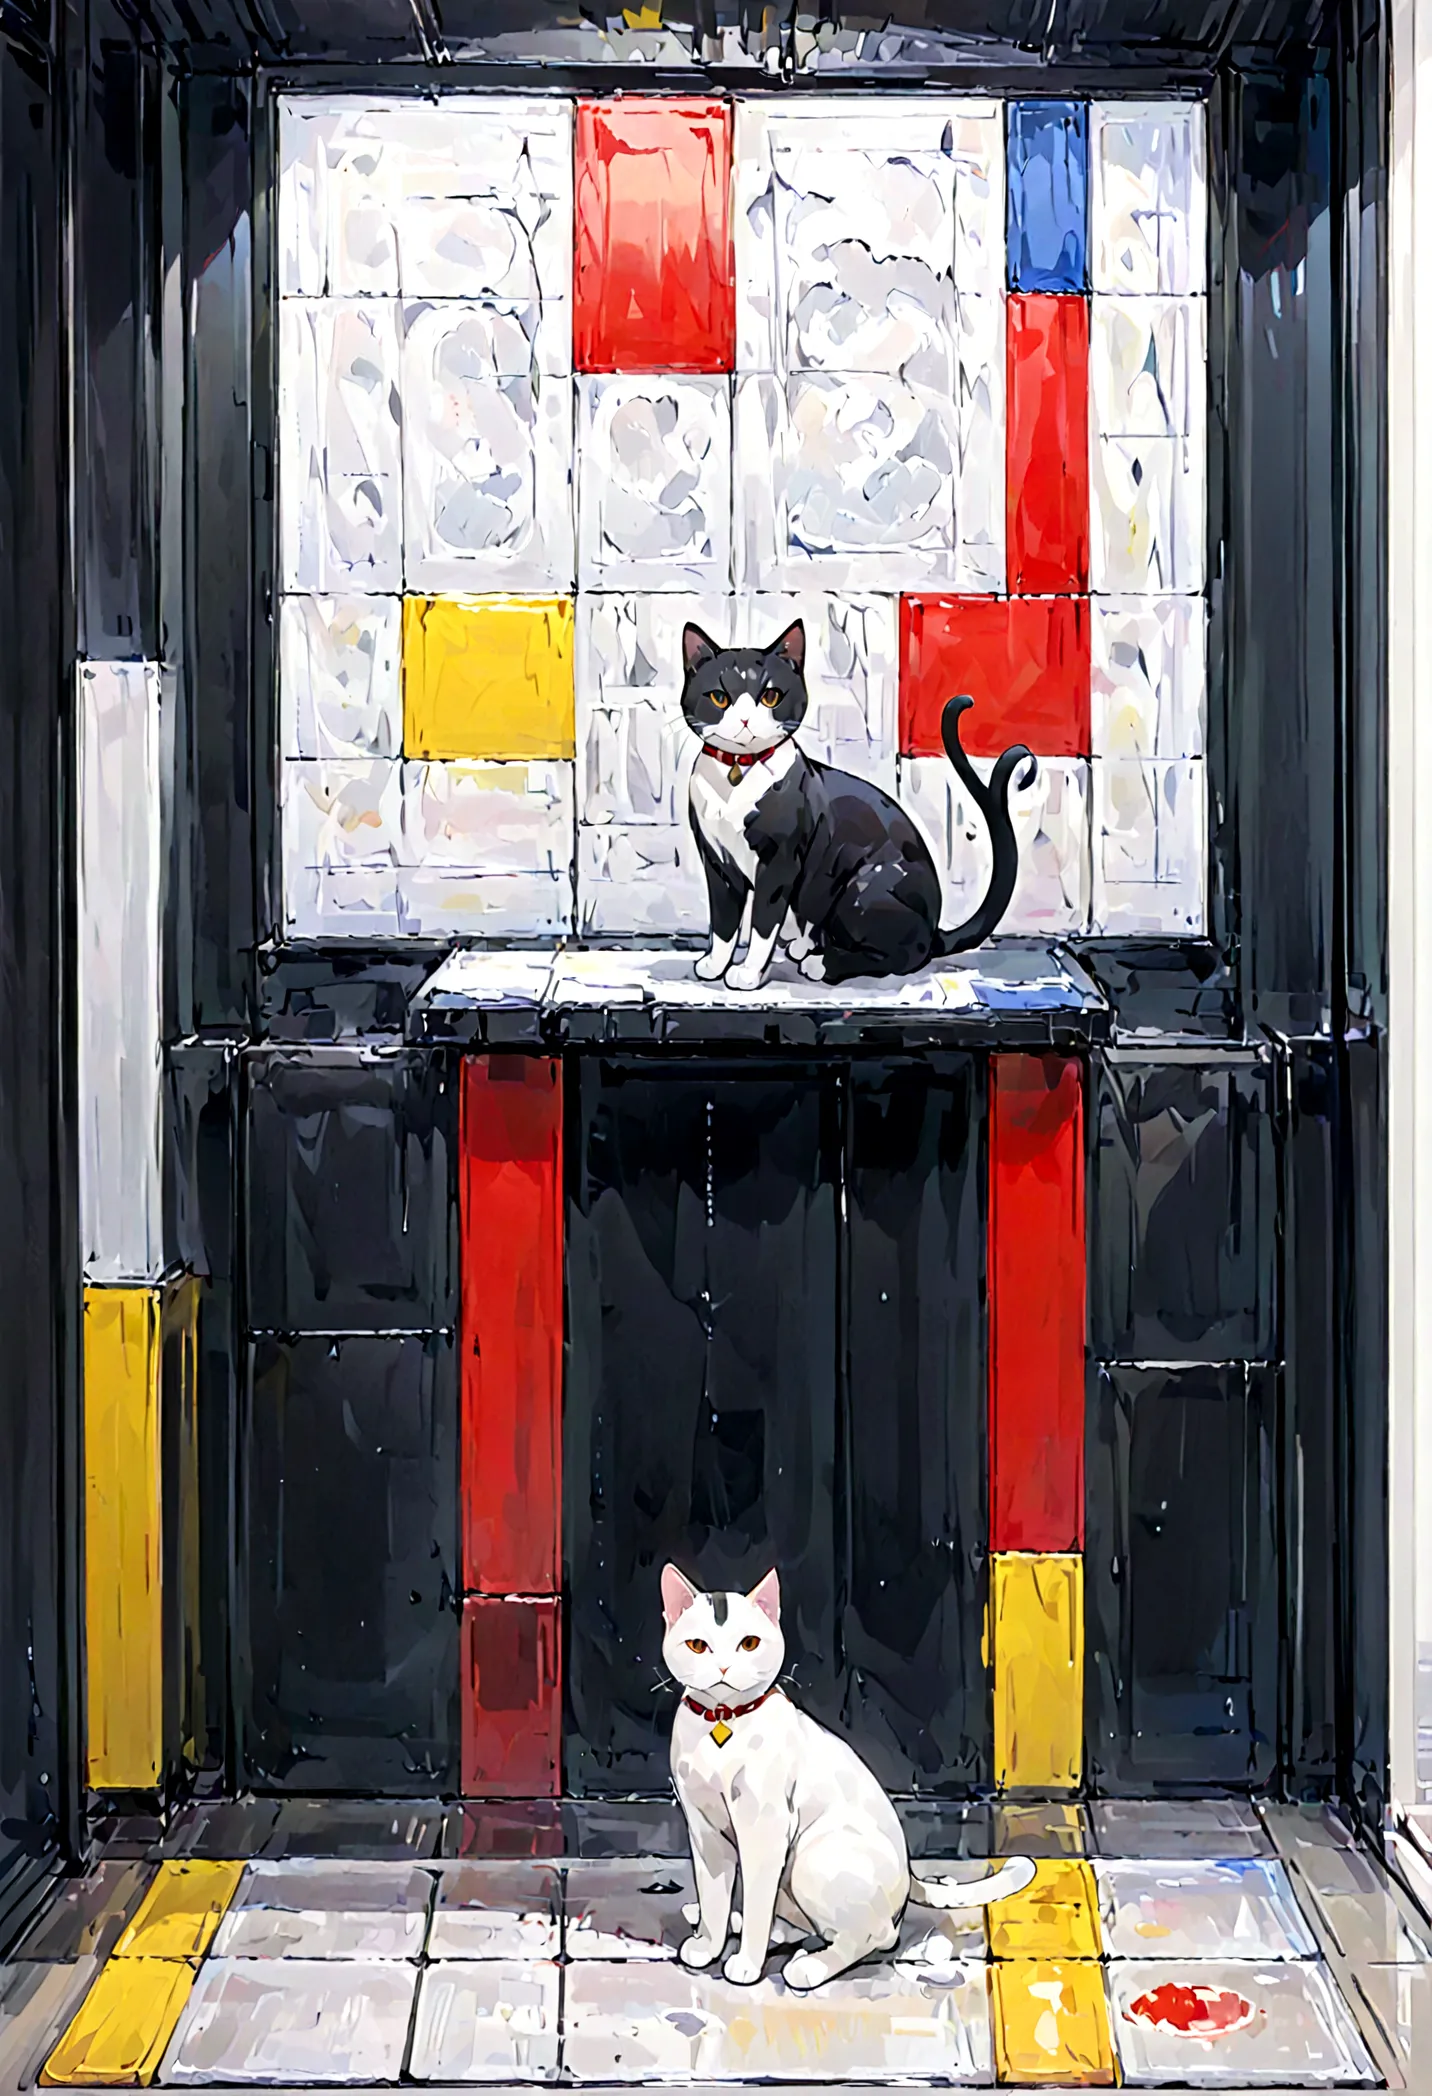 A captivating artwork by Piet Mondrian featuring a cat. The iconic Mondrian style is present, with the cat depicted in primary c...